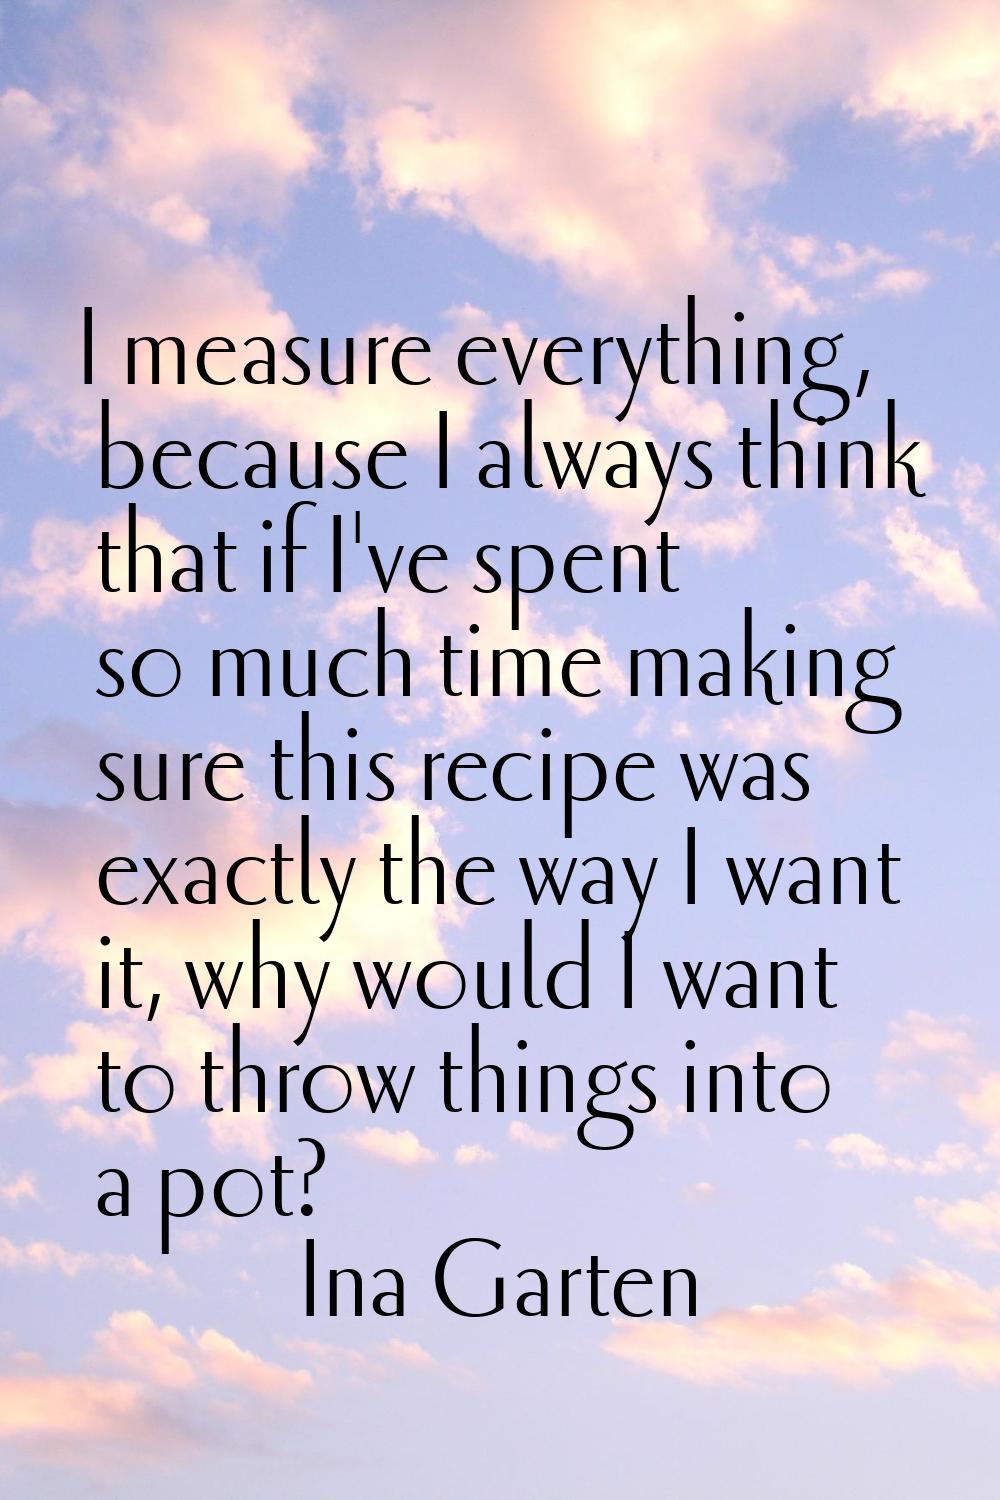 I measure everything, because I always think that if I've spent so much time making sure this recip